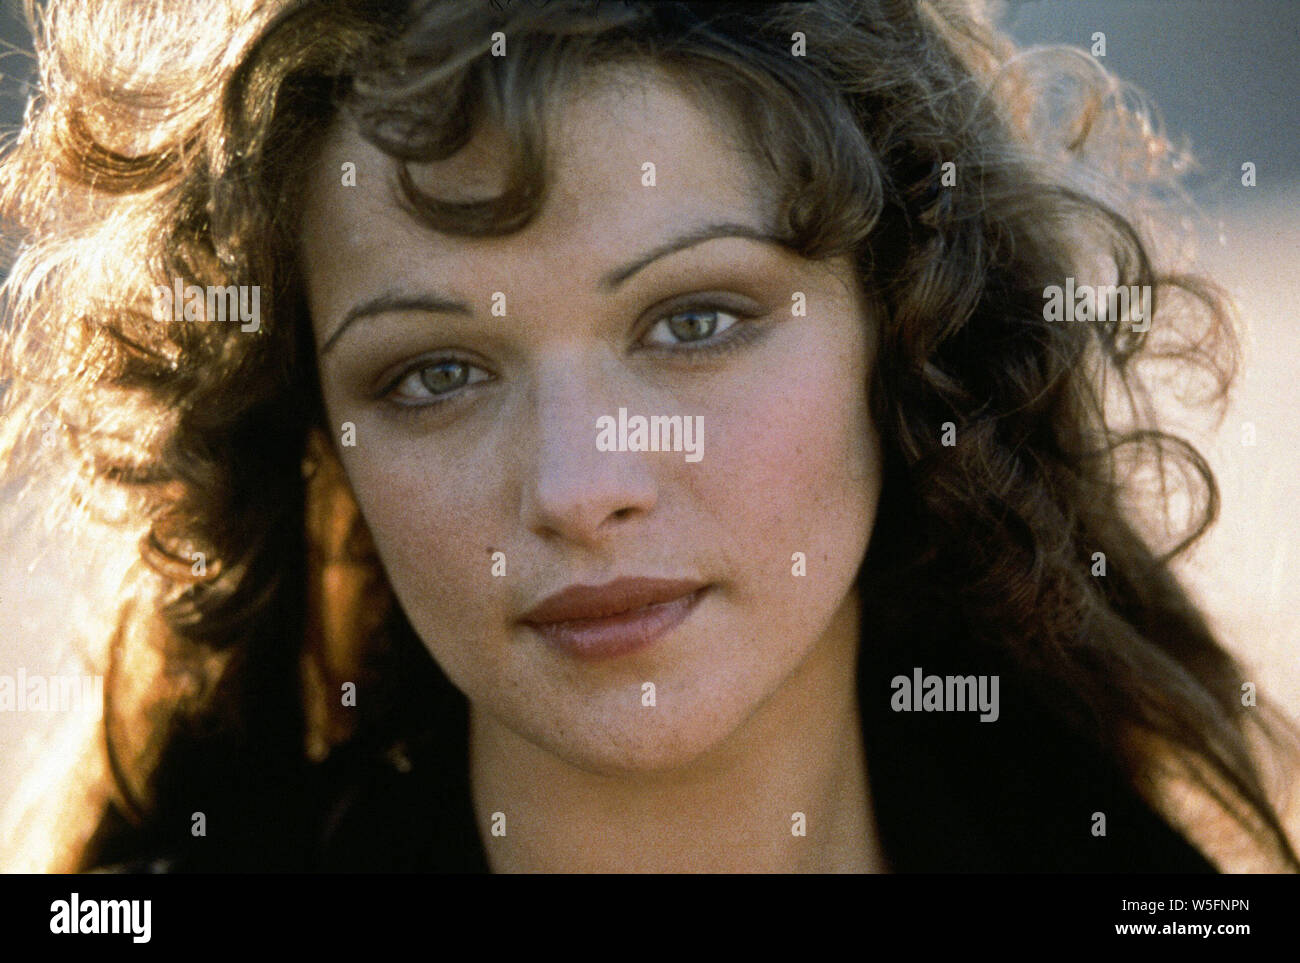 RACHEL WEISZ in THE MUMMY (1999), directed by STEPHEN SOMMERS. Credit: UNIVERSAL PICTURES / Album Stock Photo